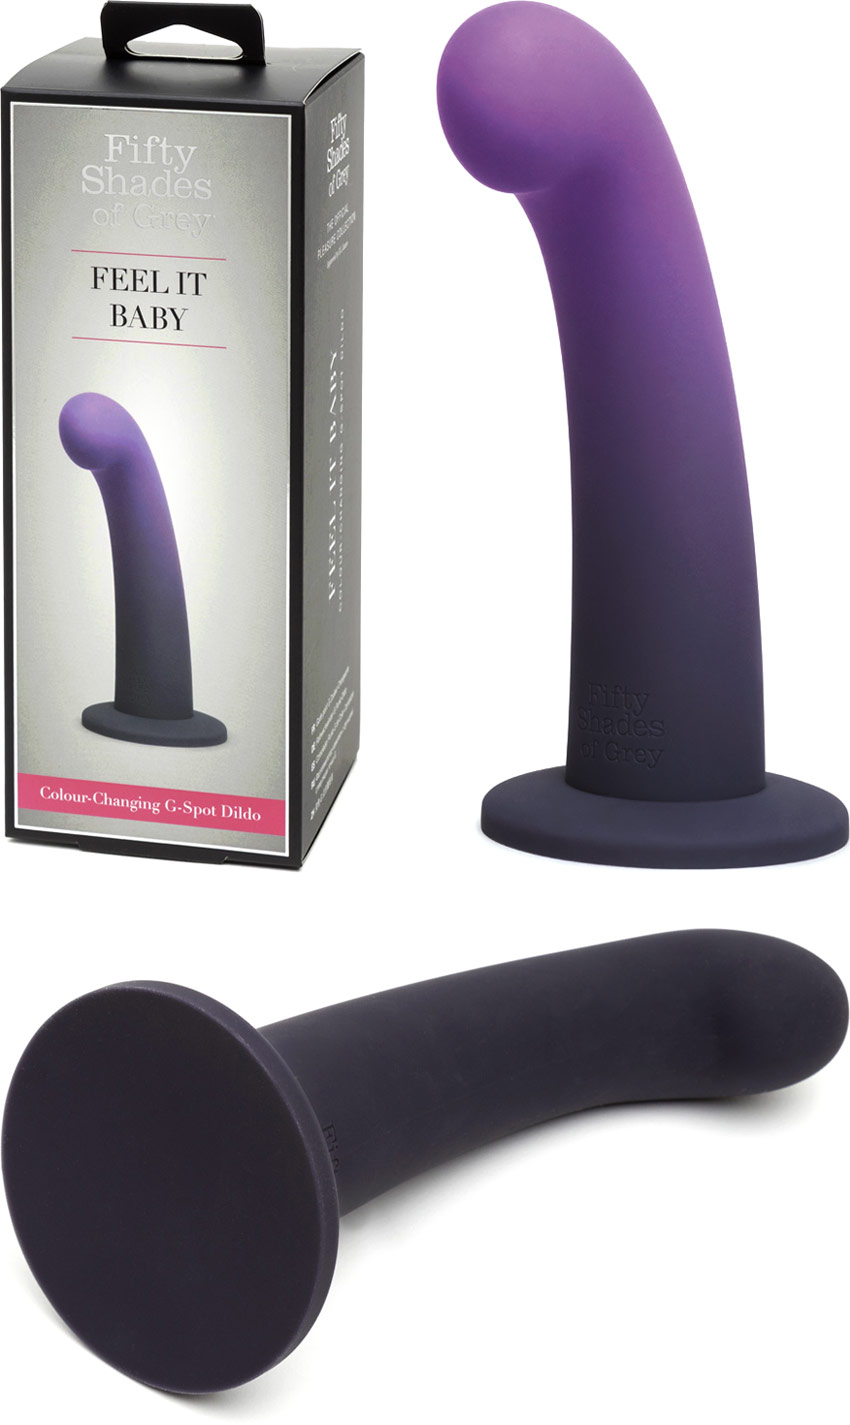 Feel It Baby thermoreaktiv Dildo - Fifty Shades of Grey